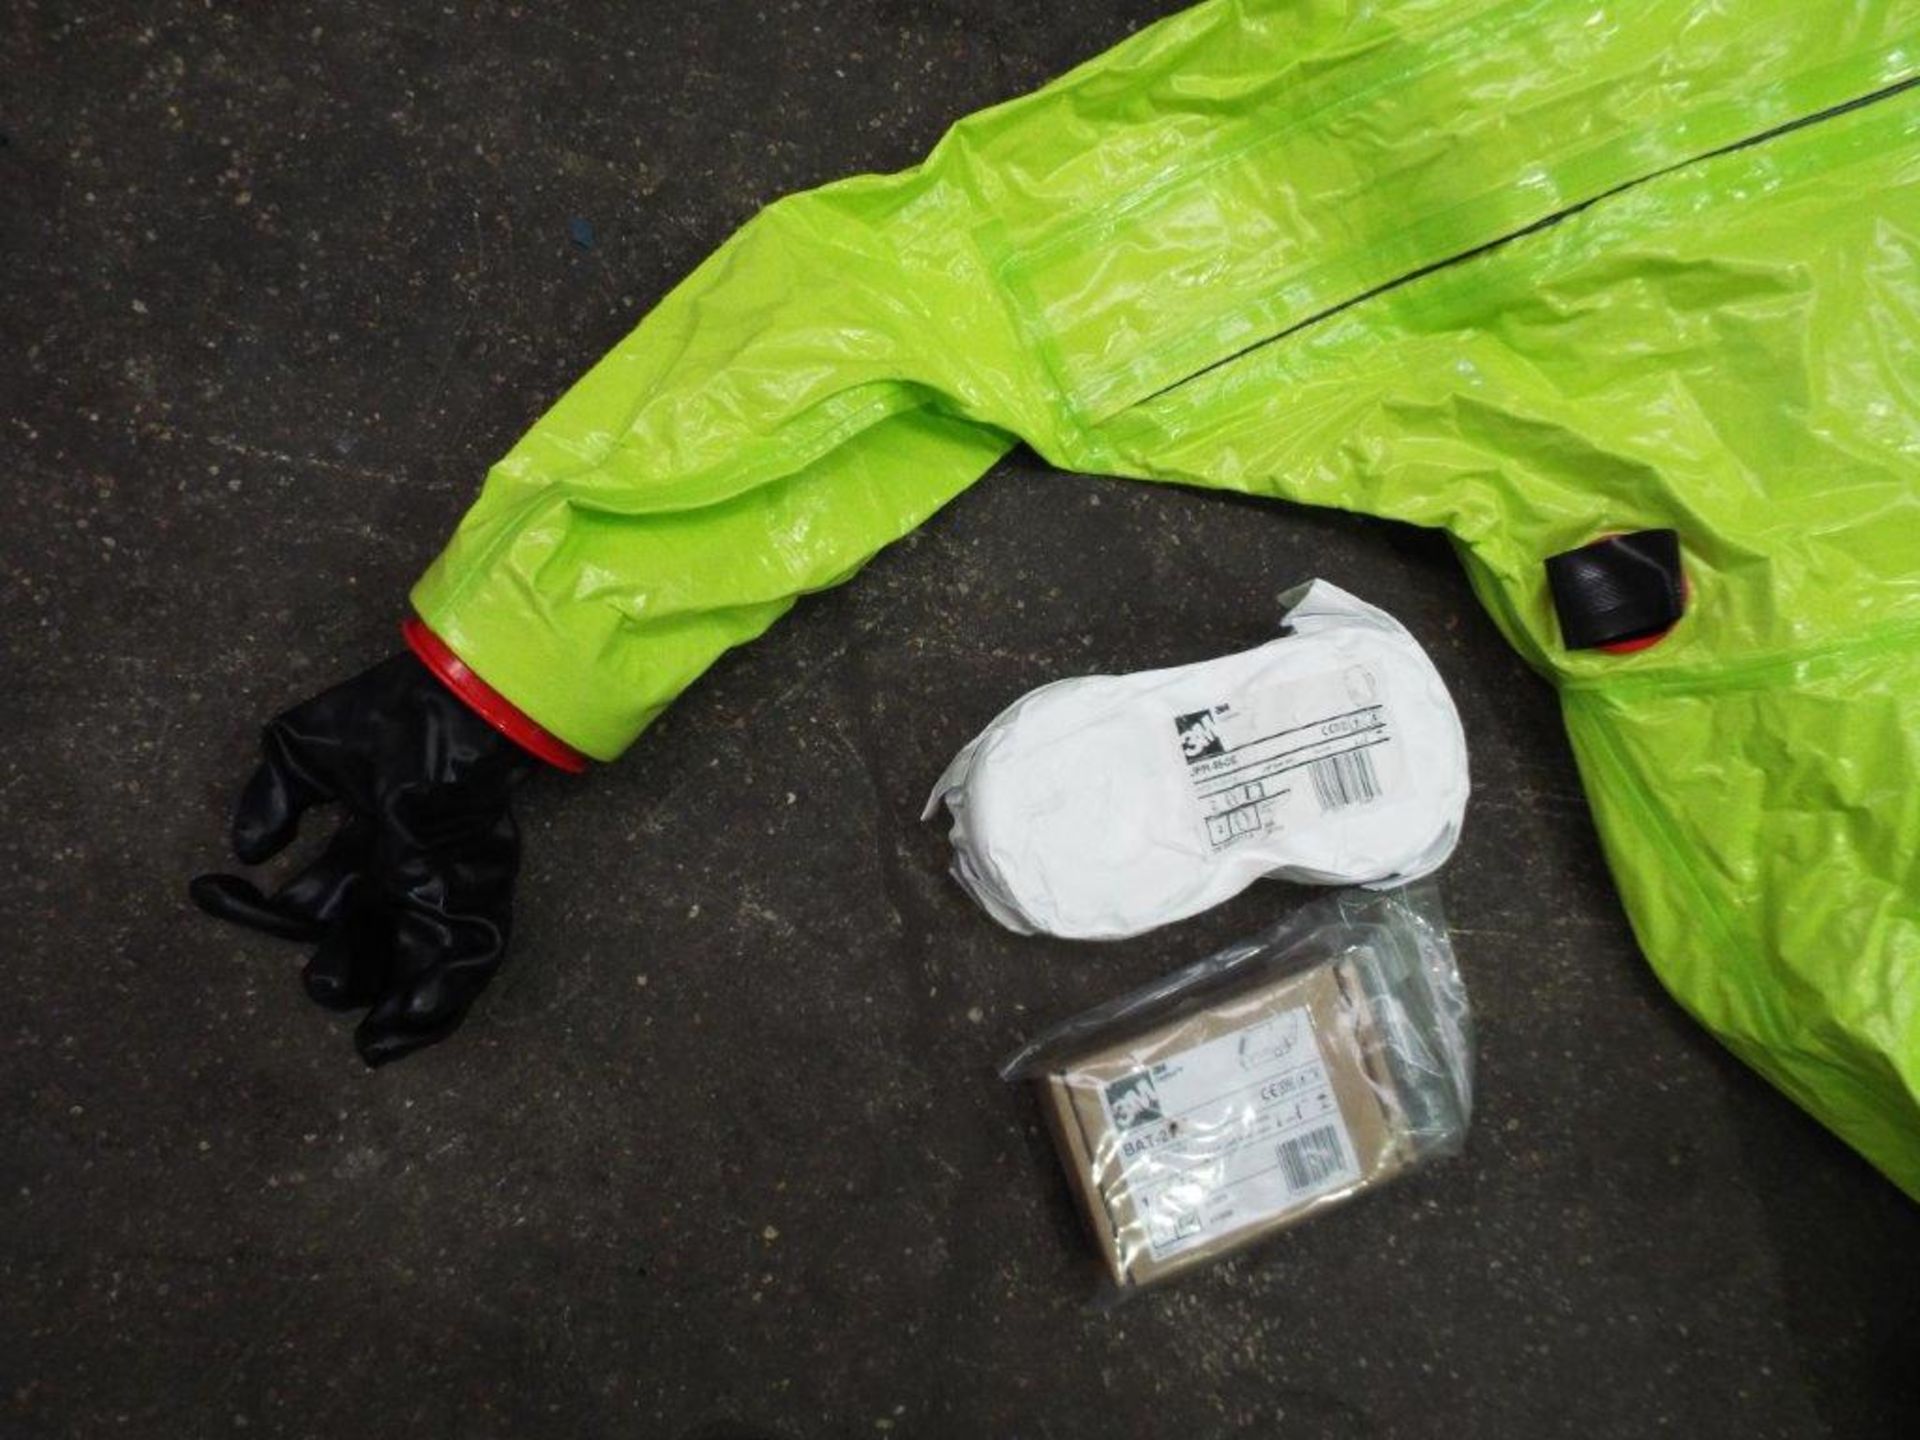 Respirex Powered Decontamination Suit with Attached Boots and Gloves, Helmet, Filters, Battery etc - Image 6 of 17